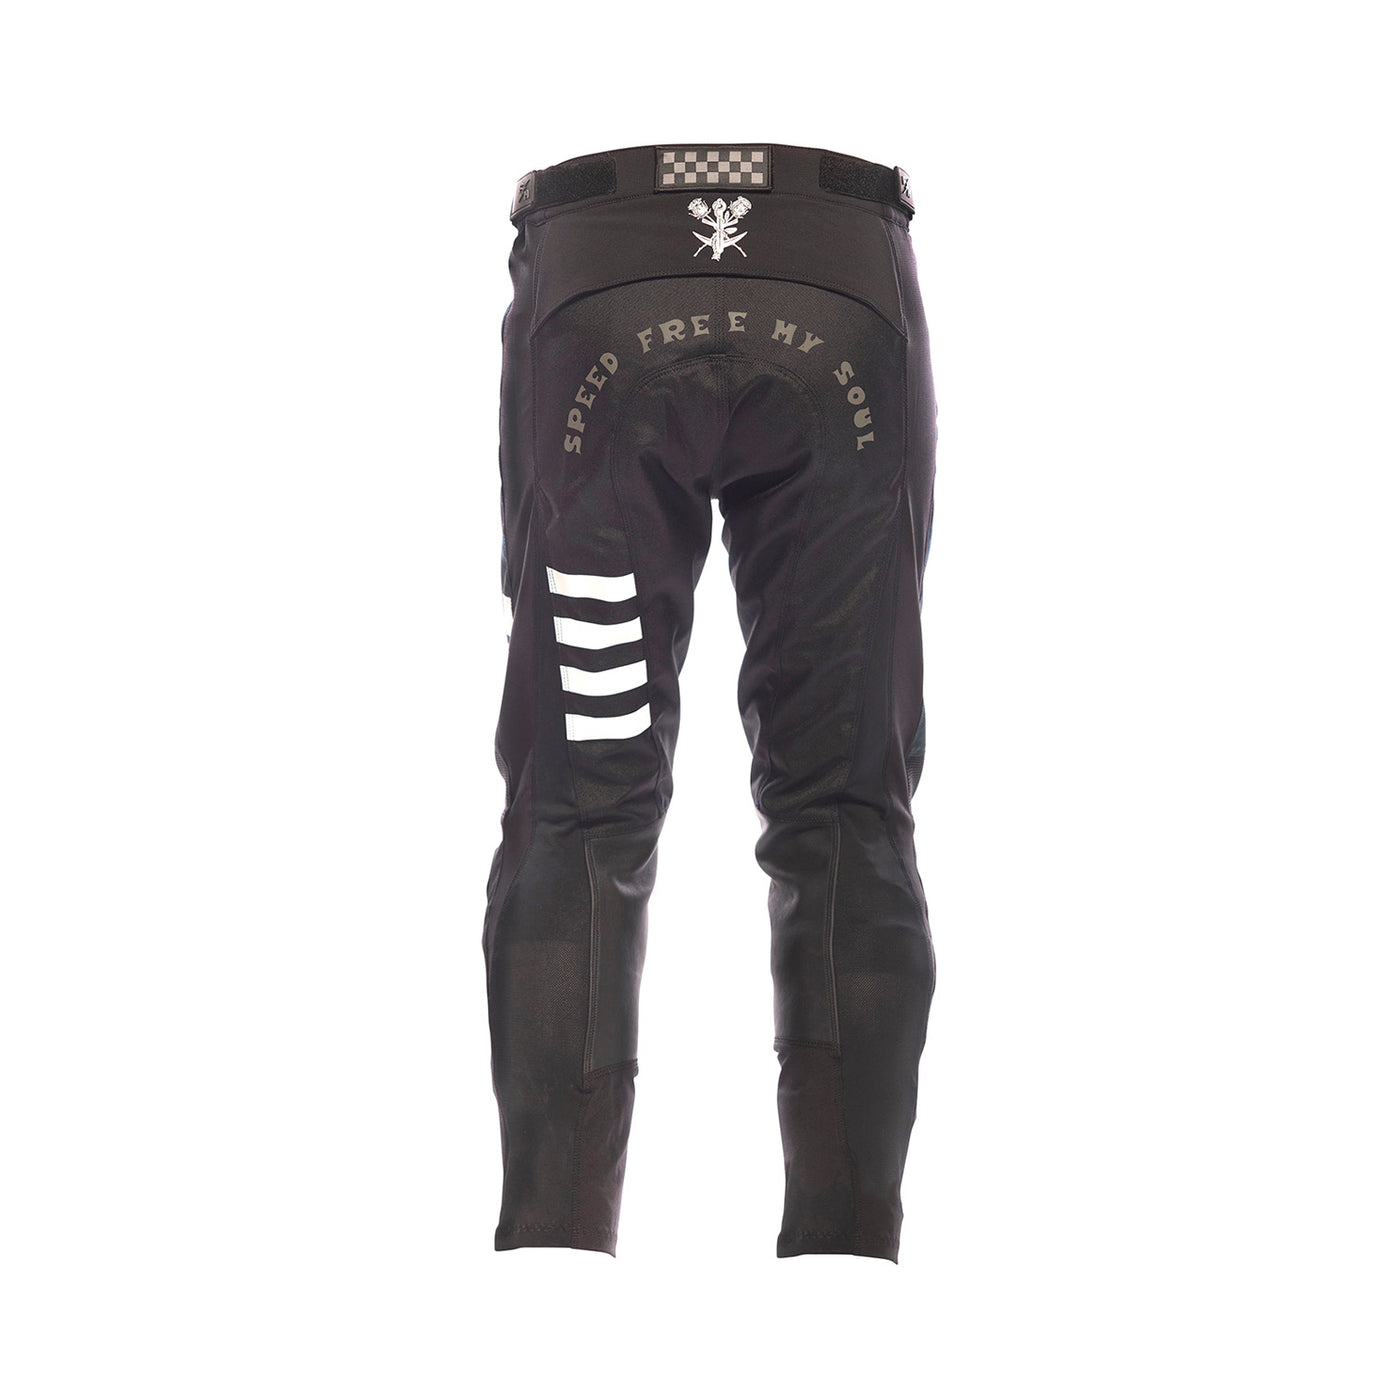 Fasthouse Youth Grindhouse Bereman Pant